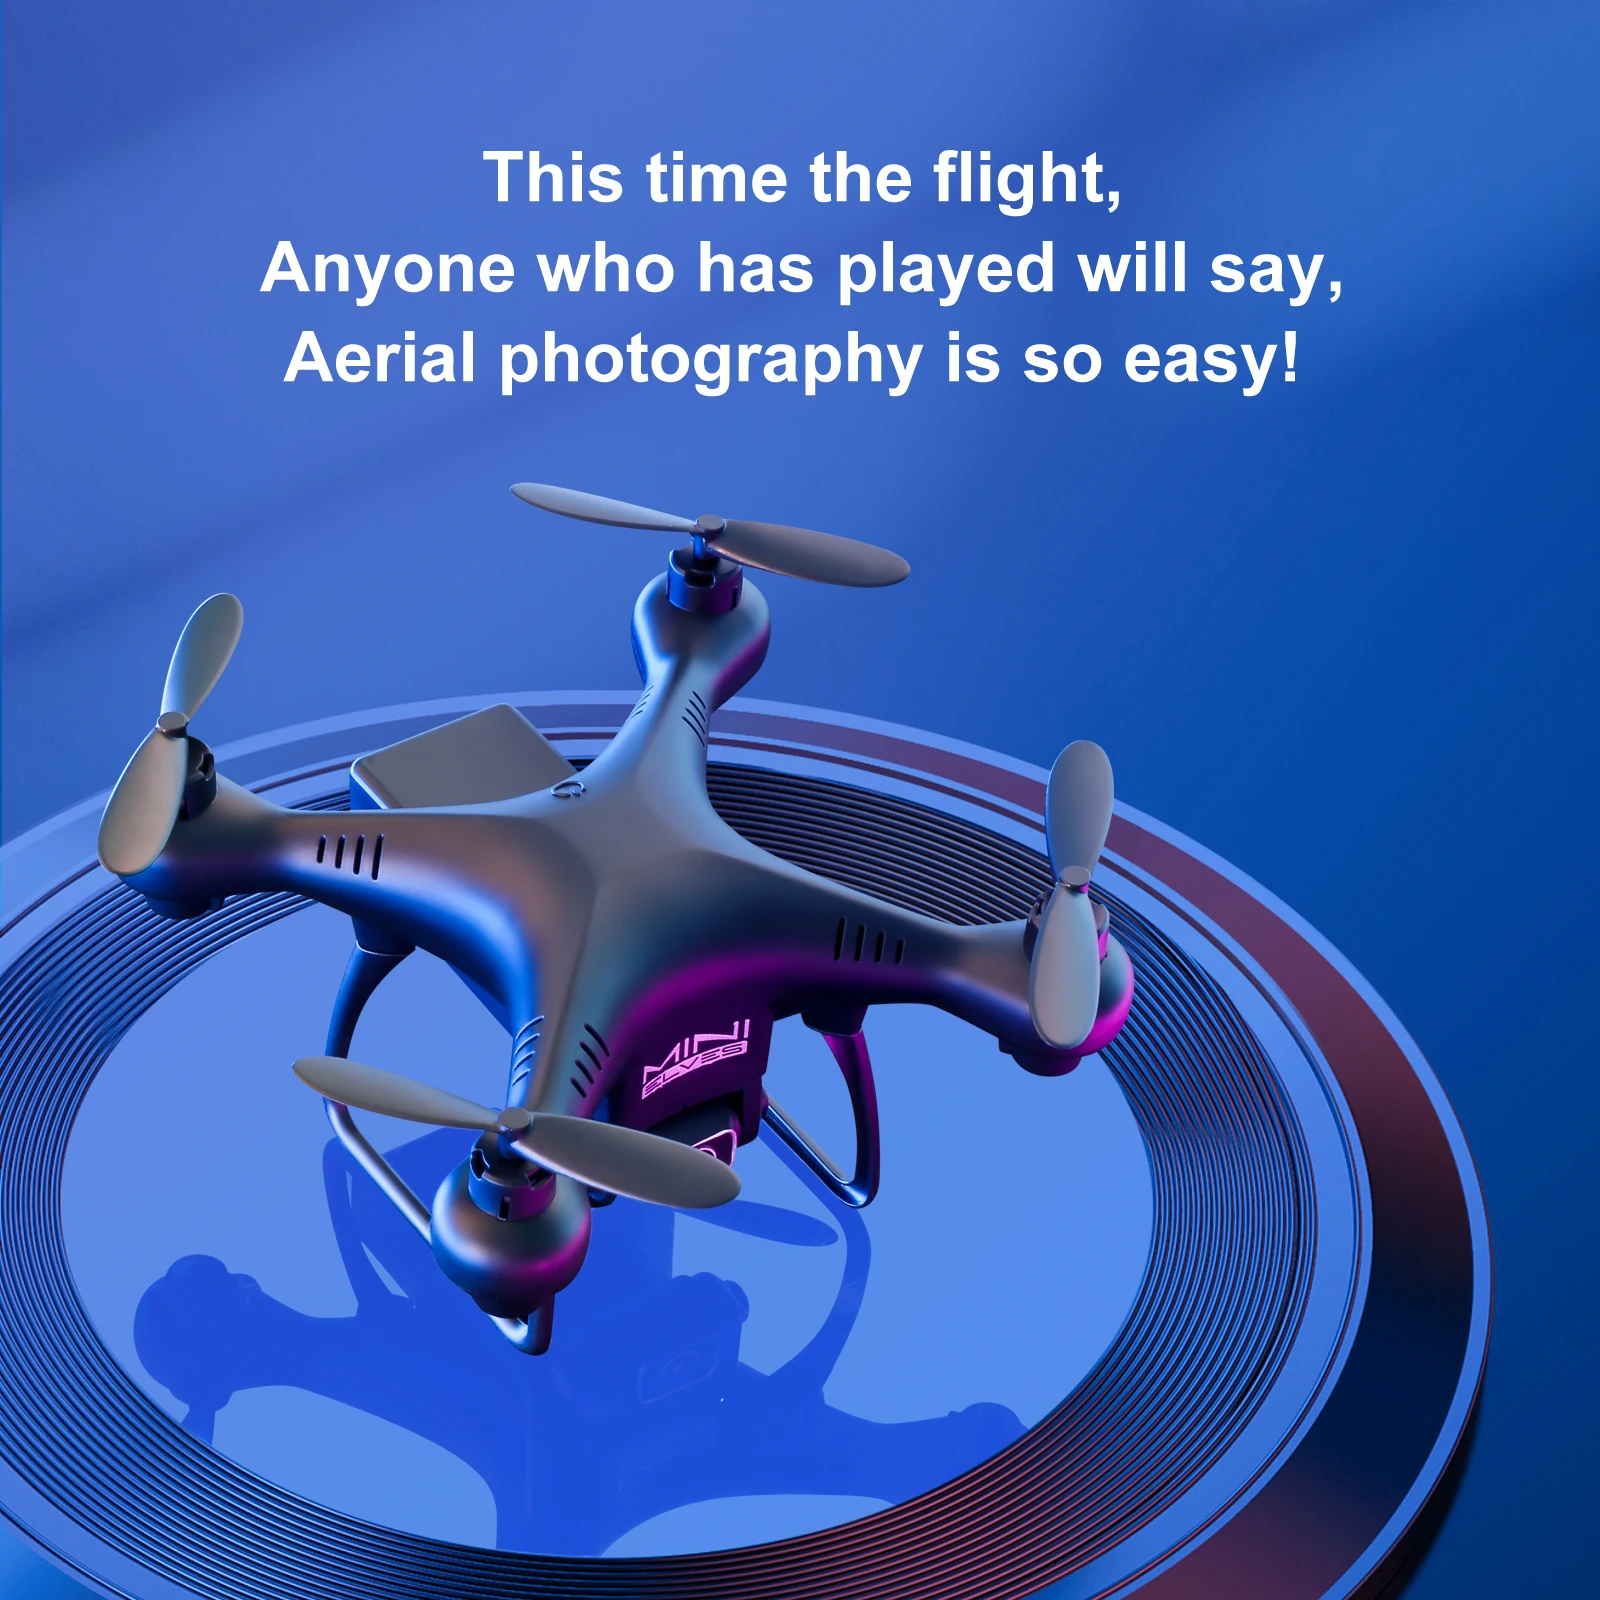 KY908 Mini Drone, this time the flight; anyone who has played will say, aerial photography